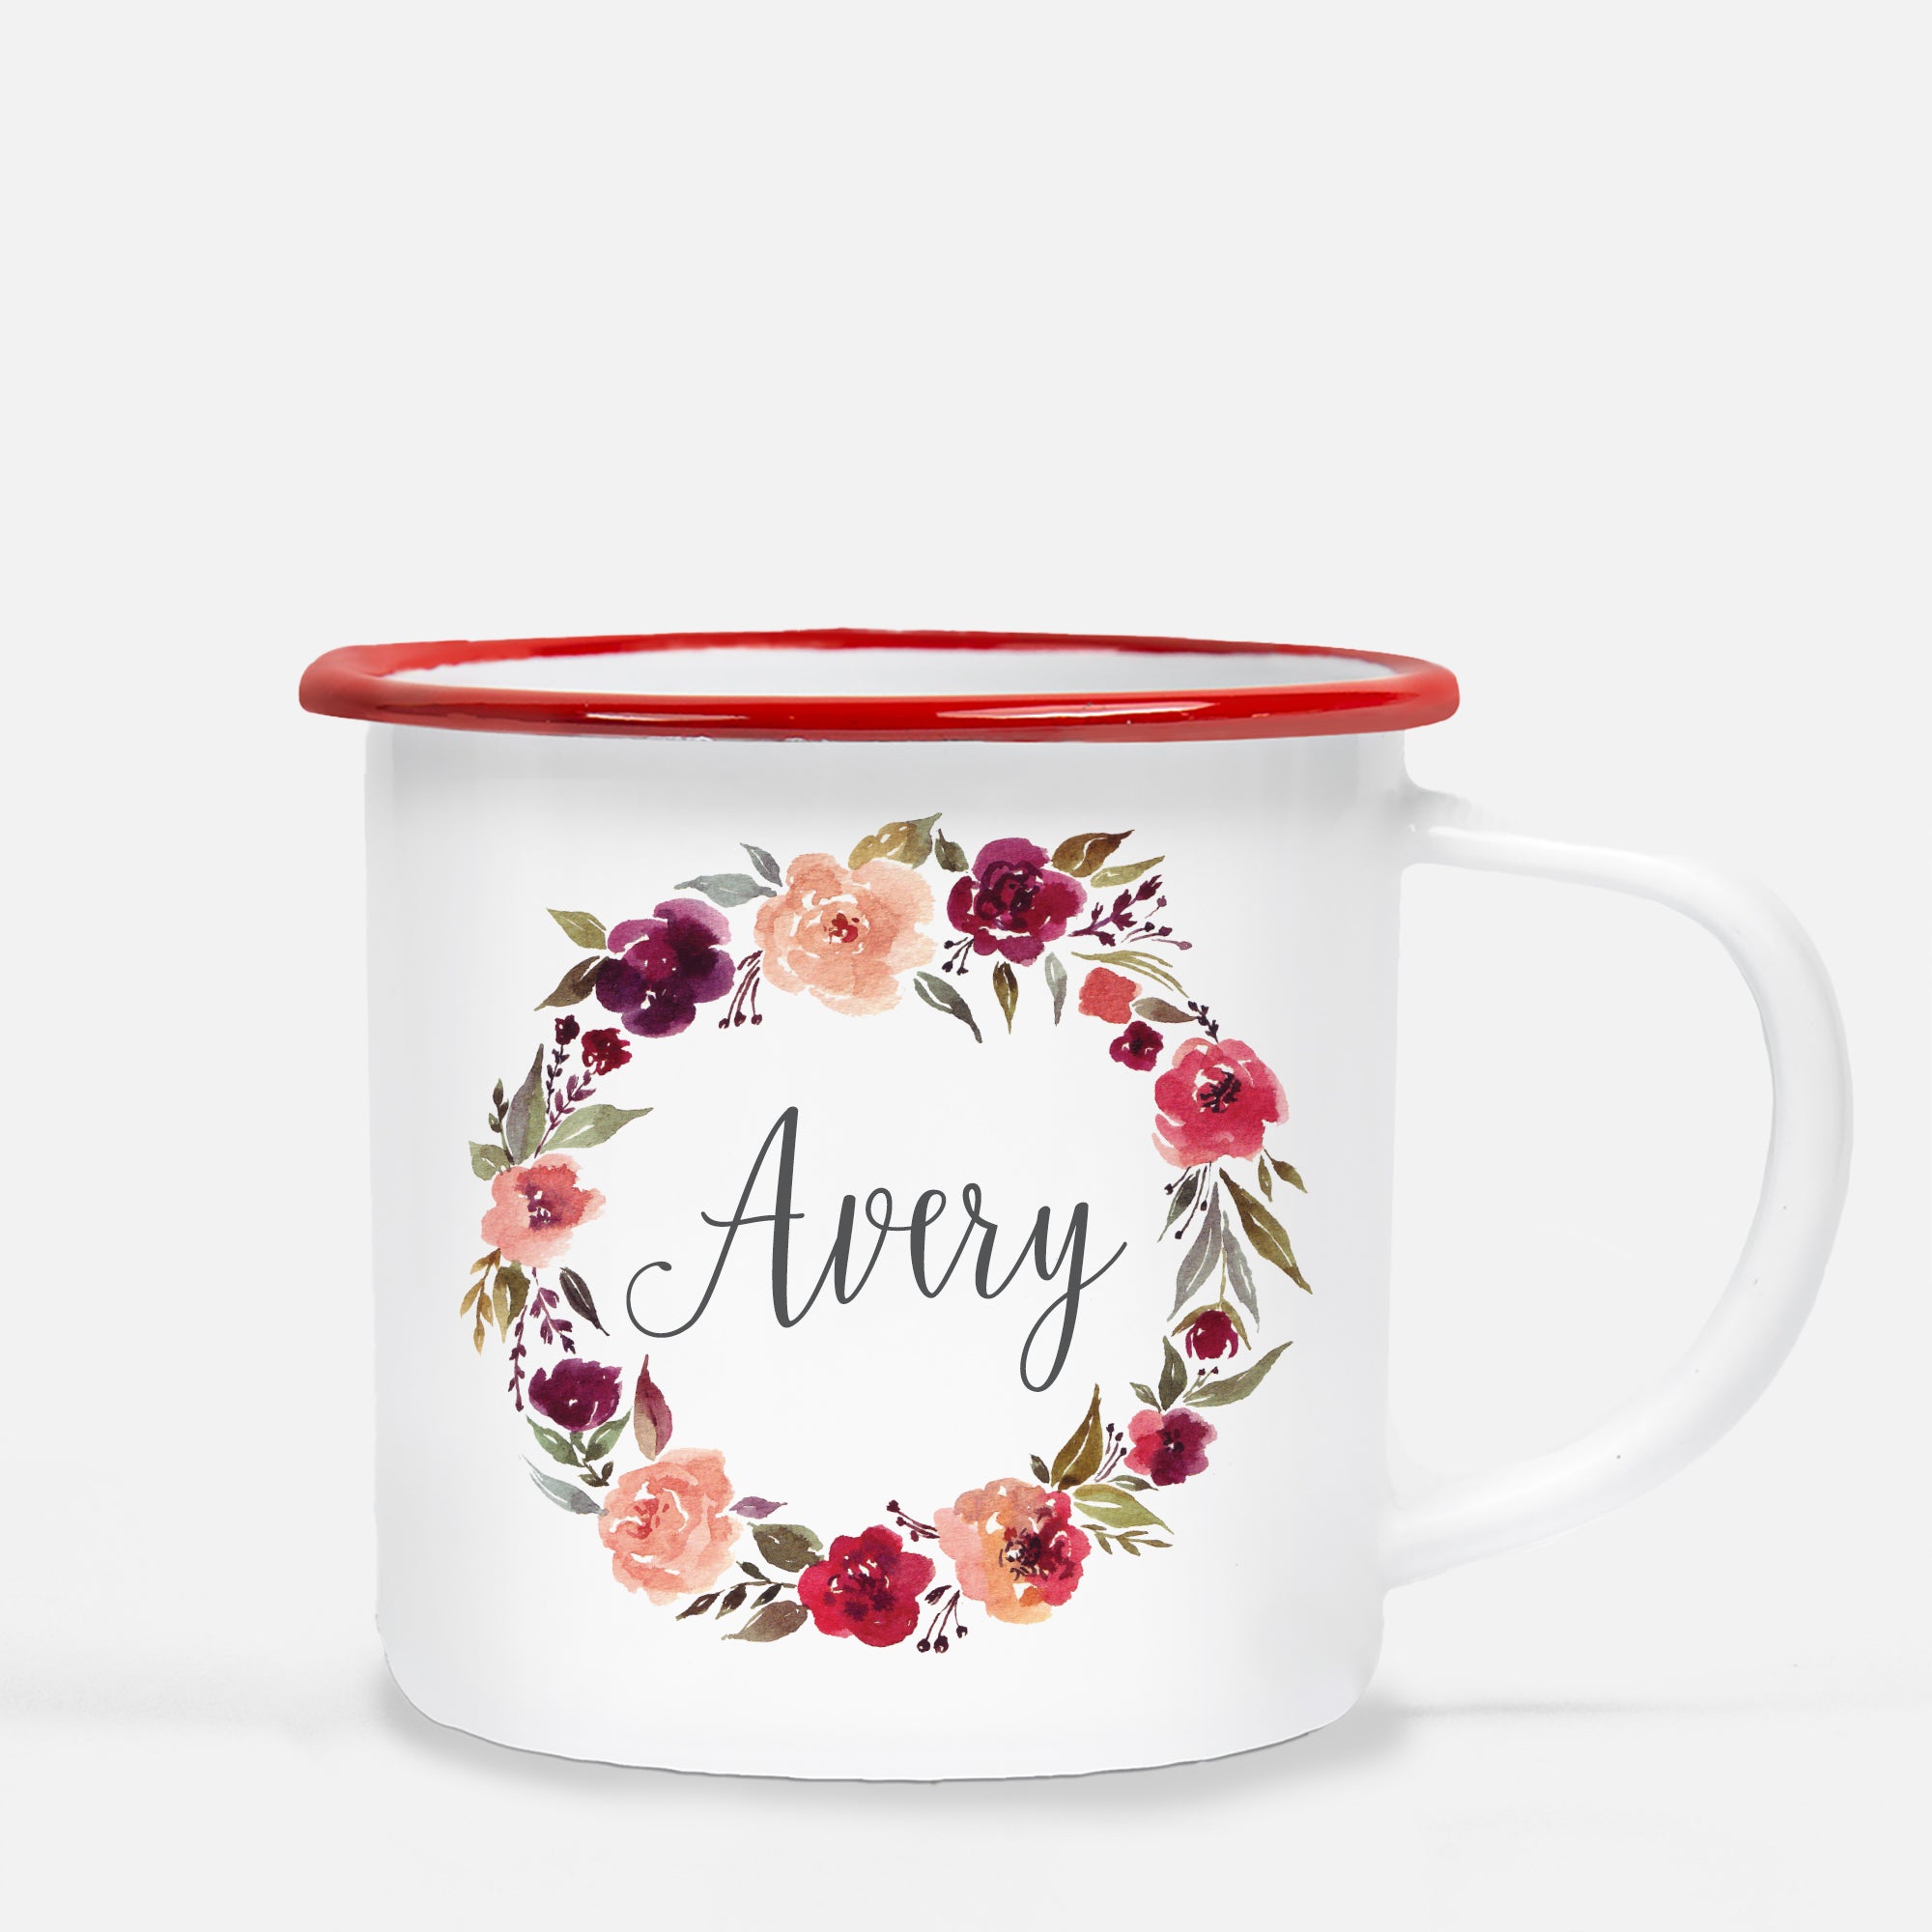 Water color wreath with beautiful scripted name in the center on a metal camp mug. Red Lip